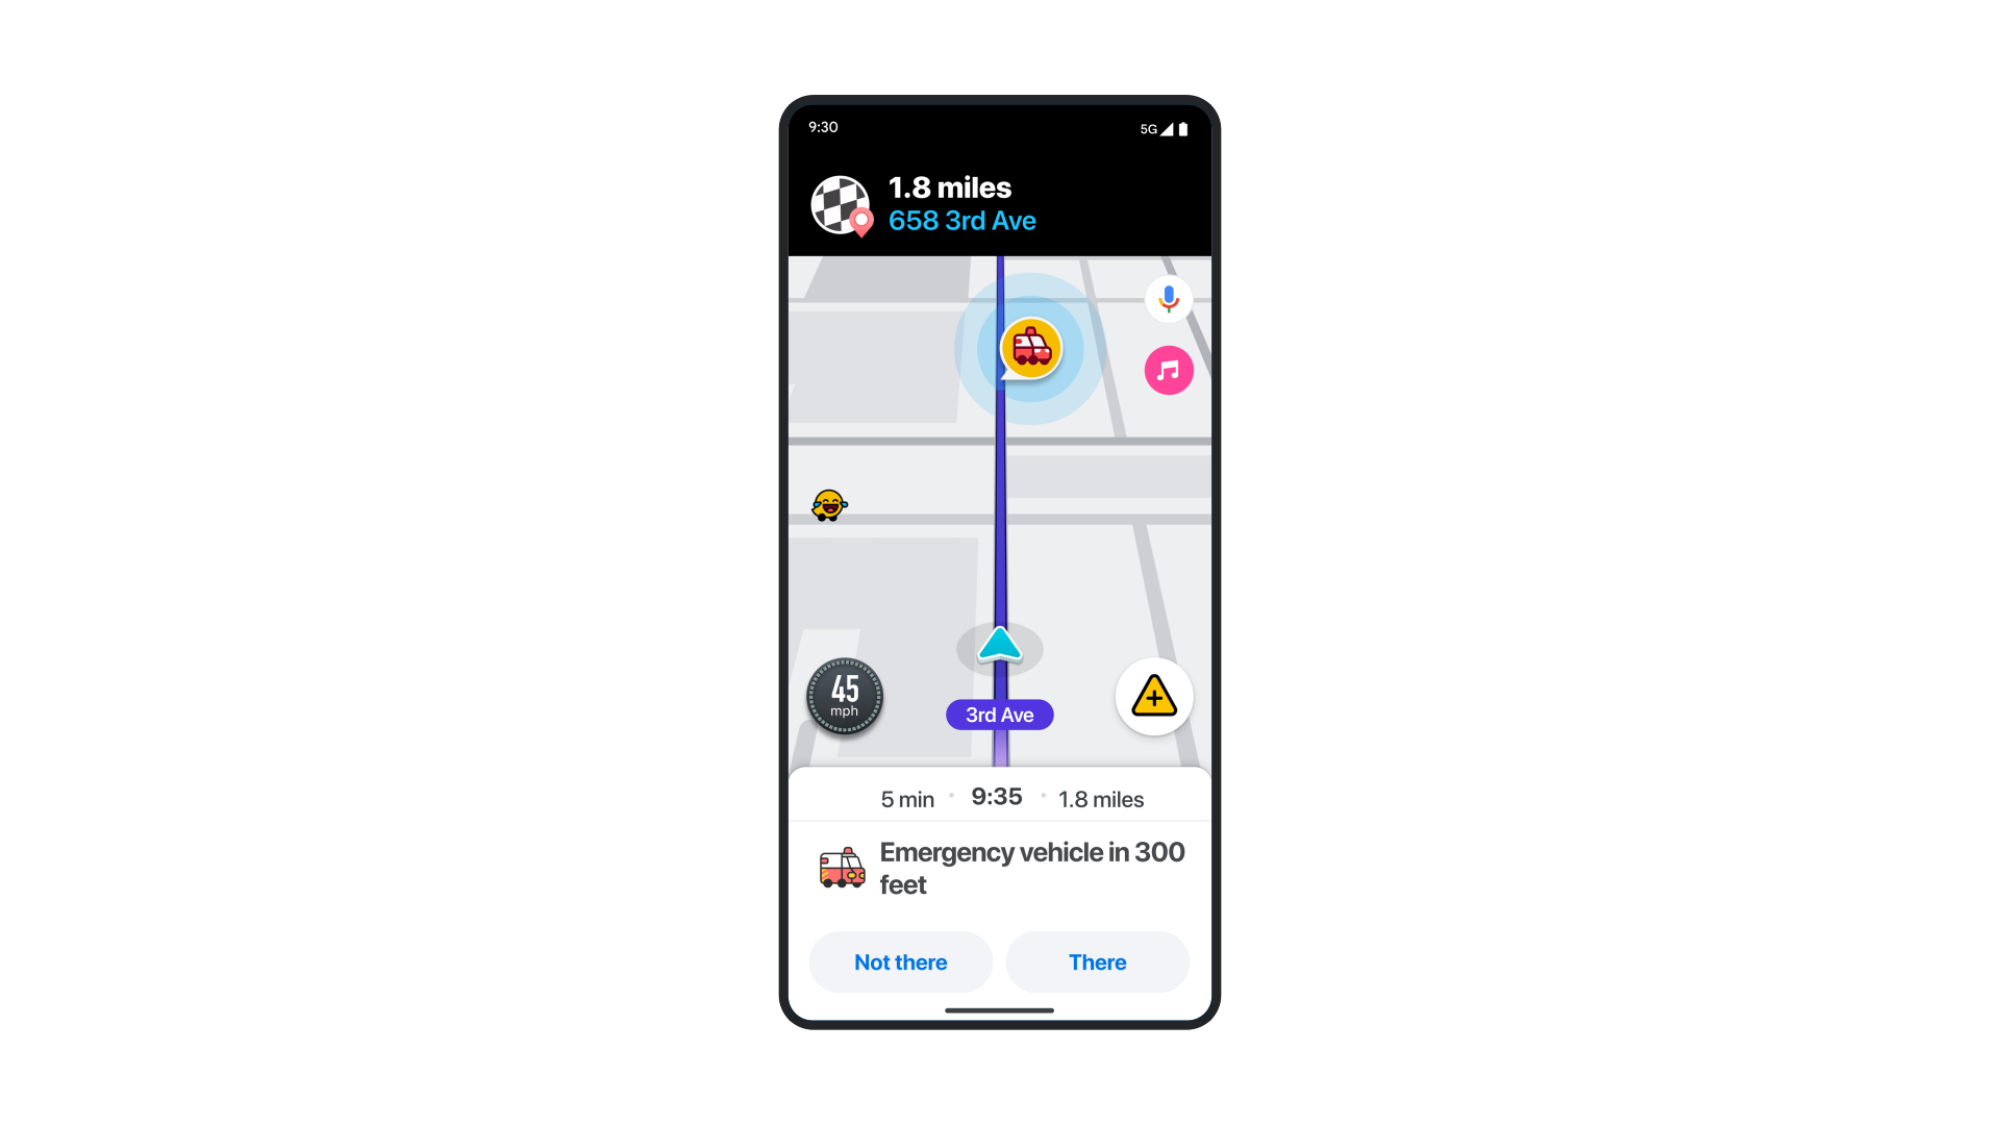 A navigation app mockup that is alerting the user that an emergecny vehicle is stopped ahead